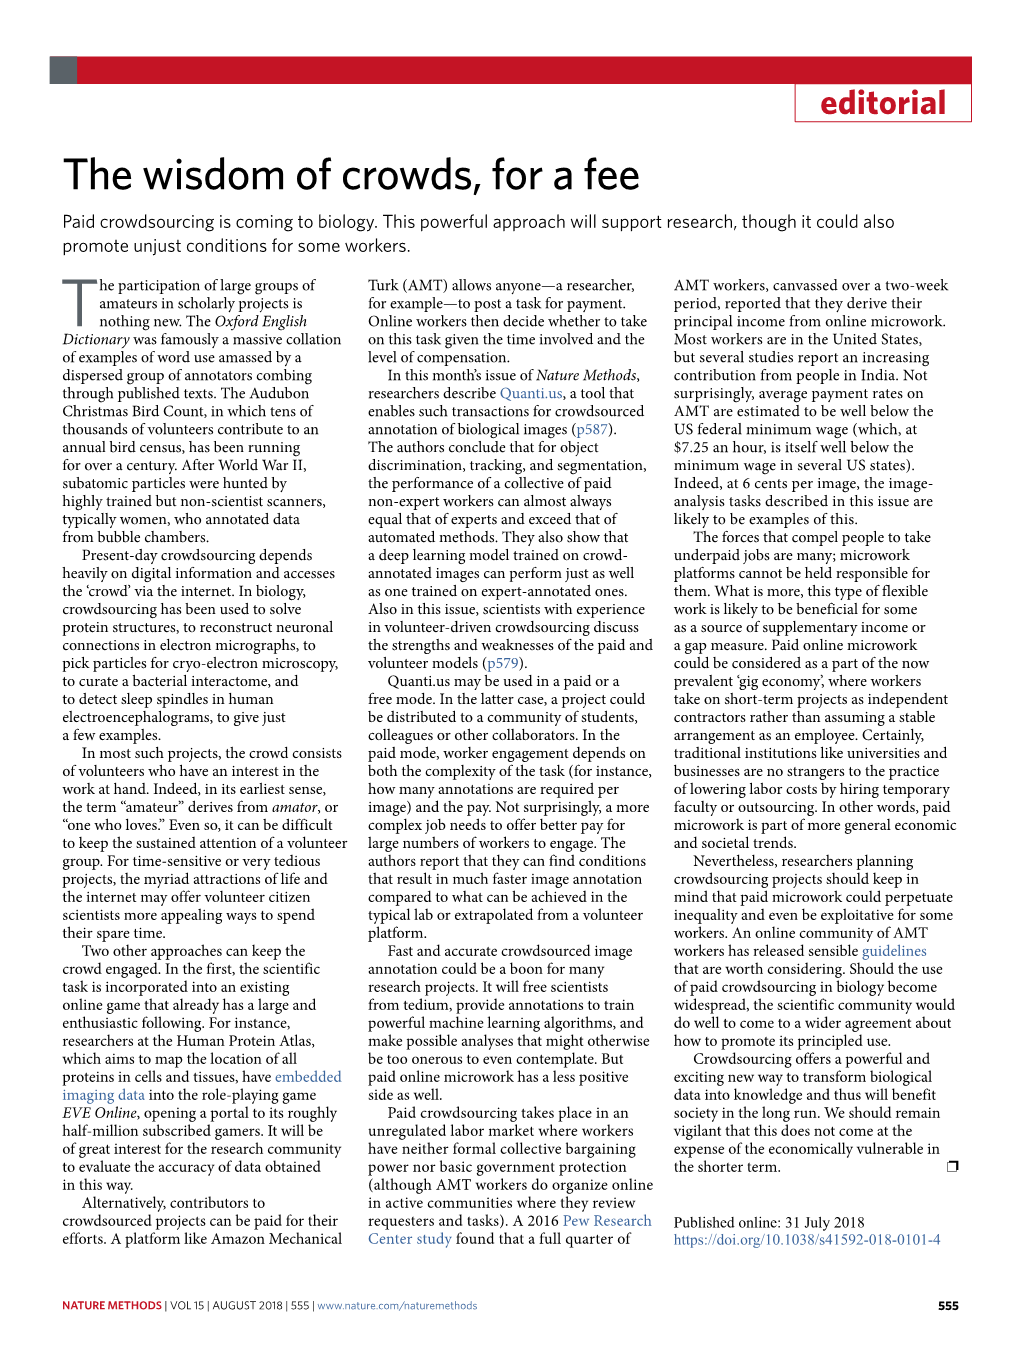 The Wisdom of Crowds, for a Fee Paid Crowdsourcing Is Coming to Biology